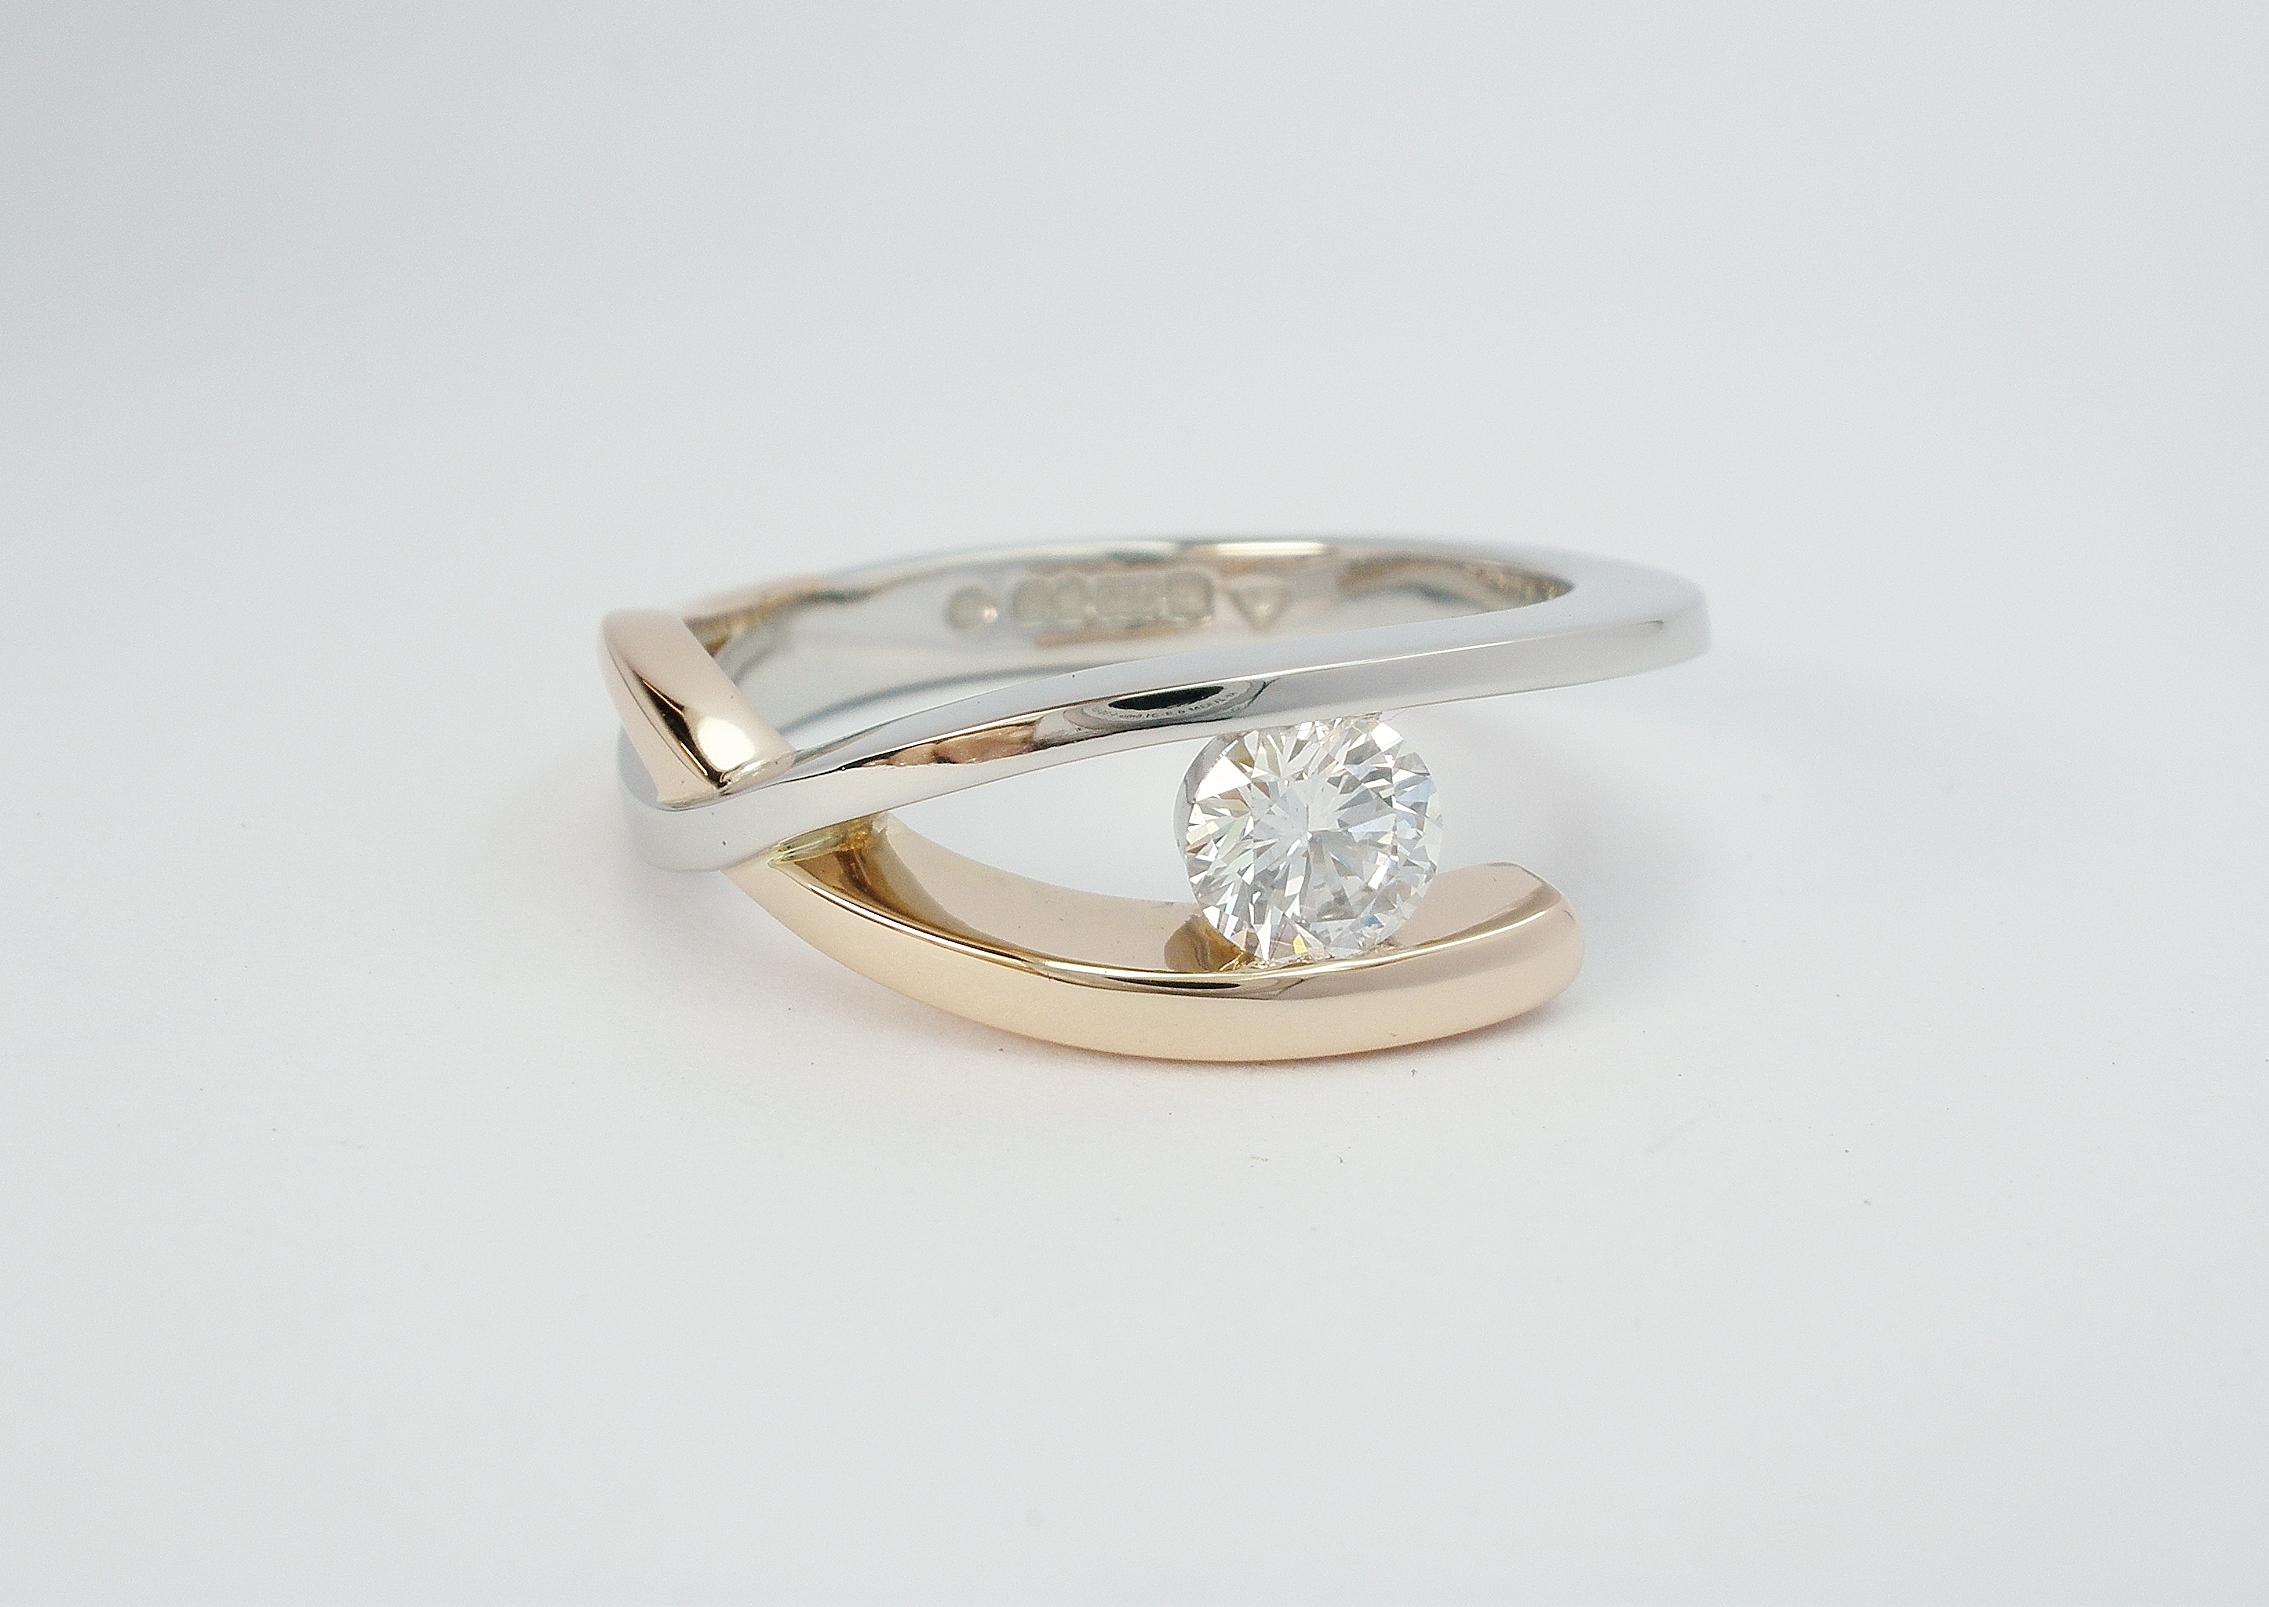 Platinum and 18ct. red gold ( rose gold, pink gold ) open cross-over single stone 0.37ct. round brilliant cut diamond ring. Ideal diamond sizes from 0.35cts. to 0.60cts.